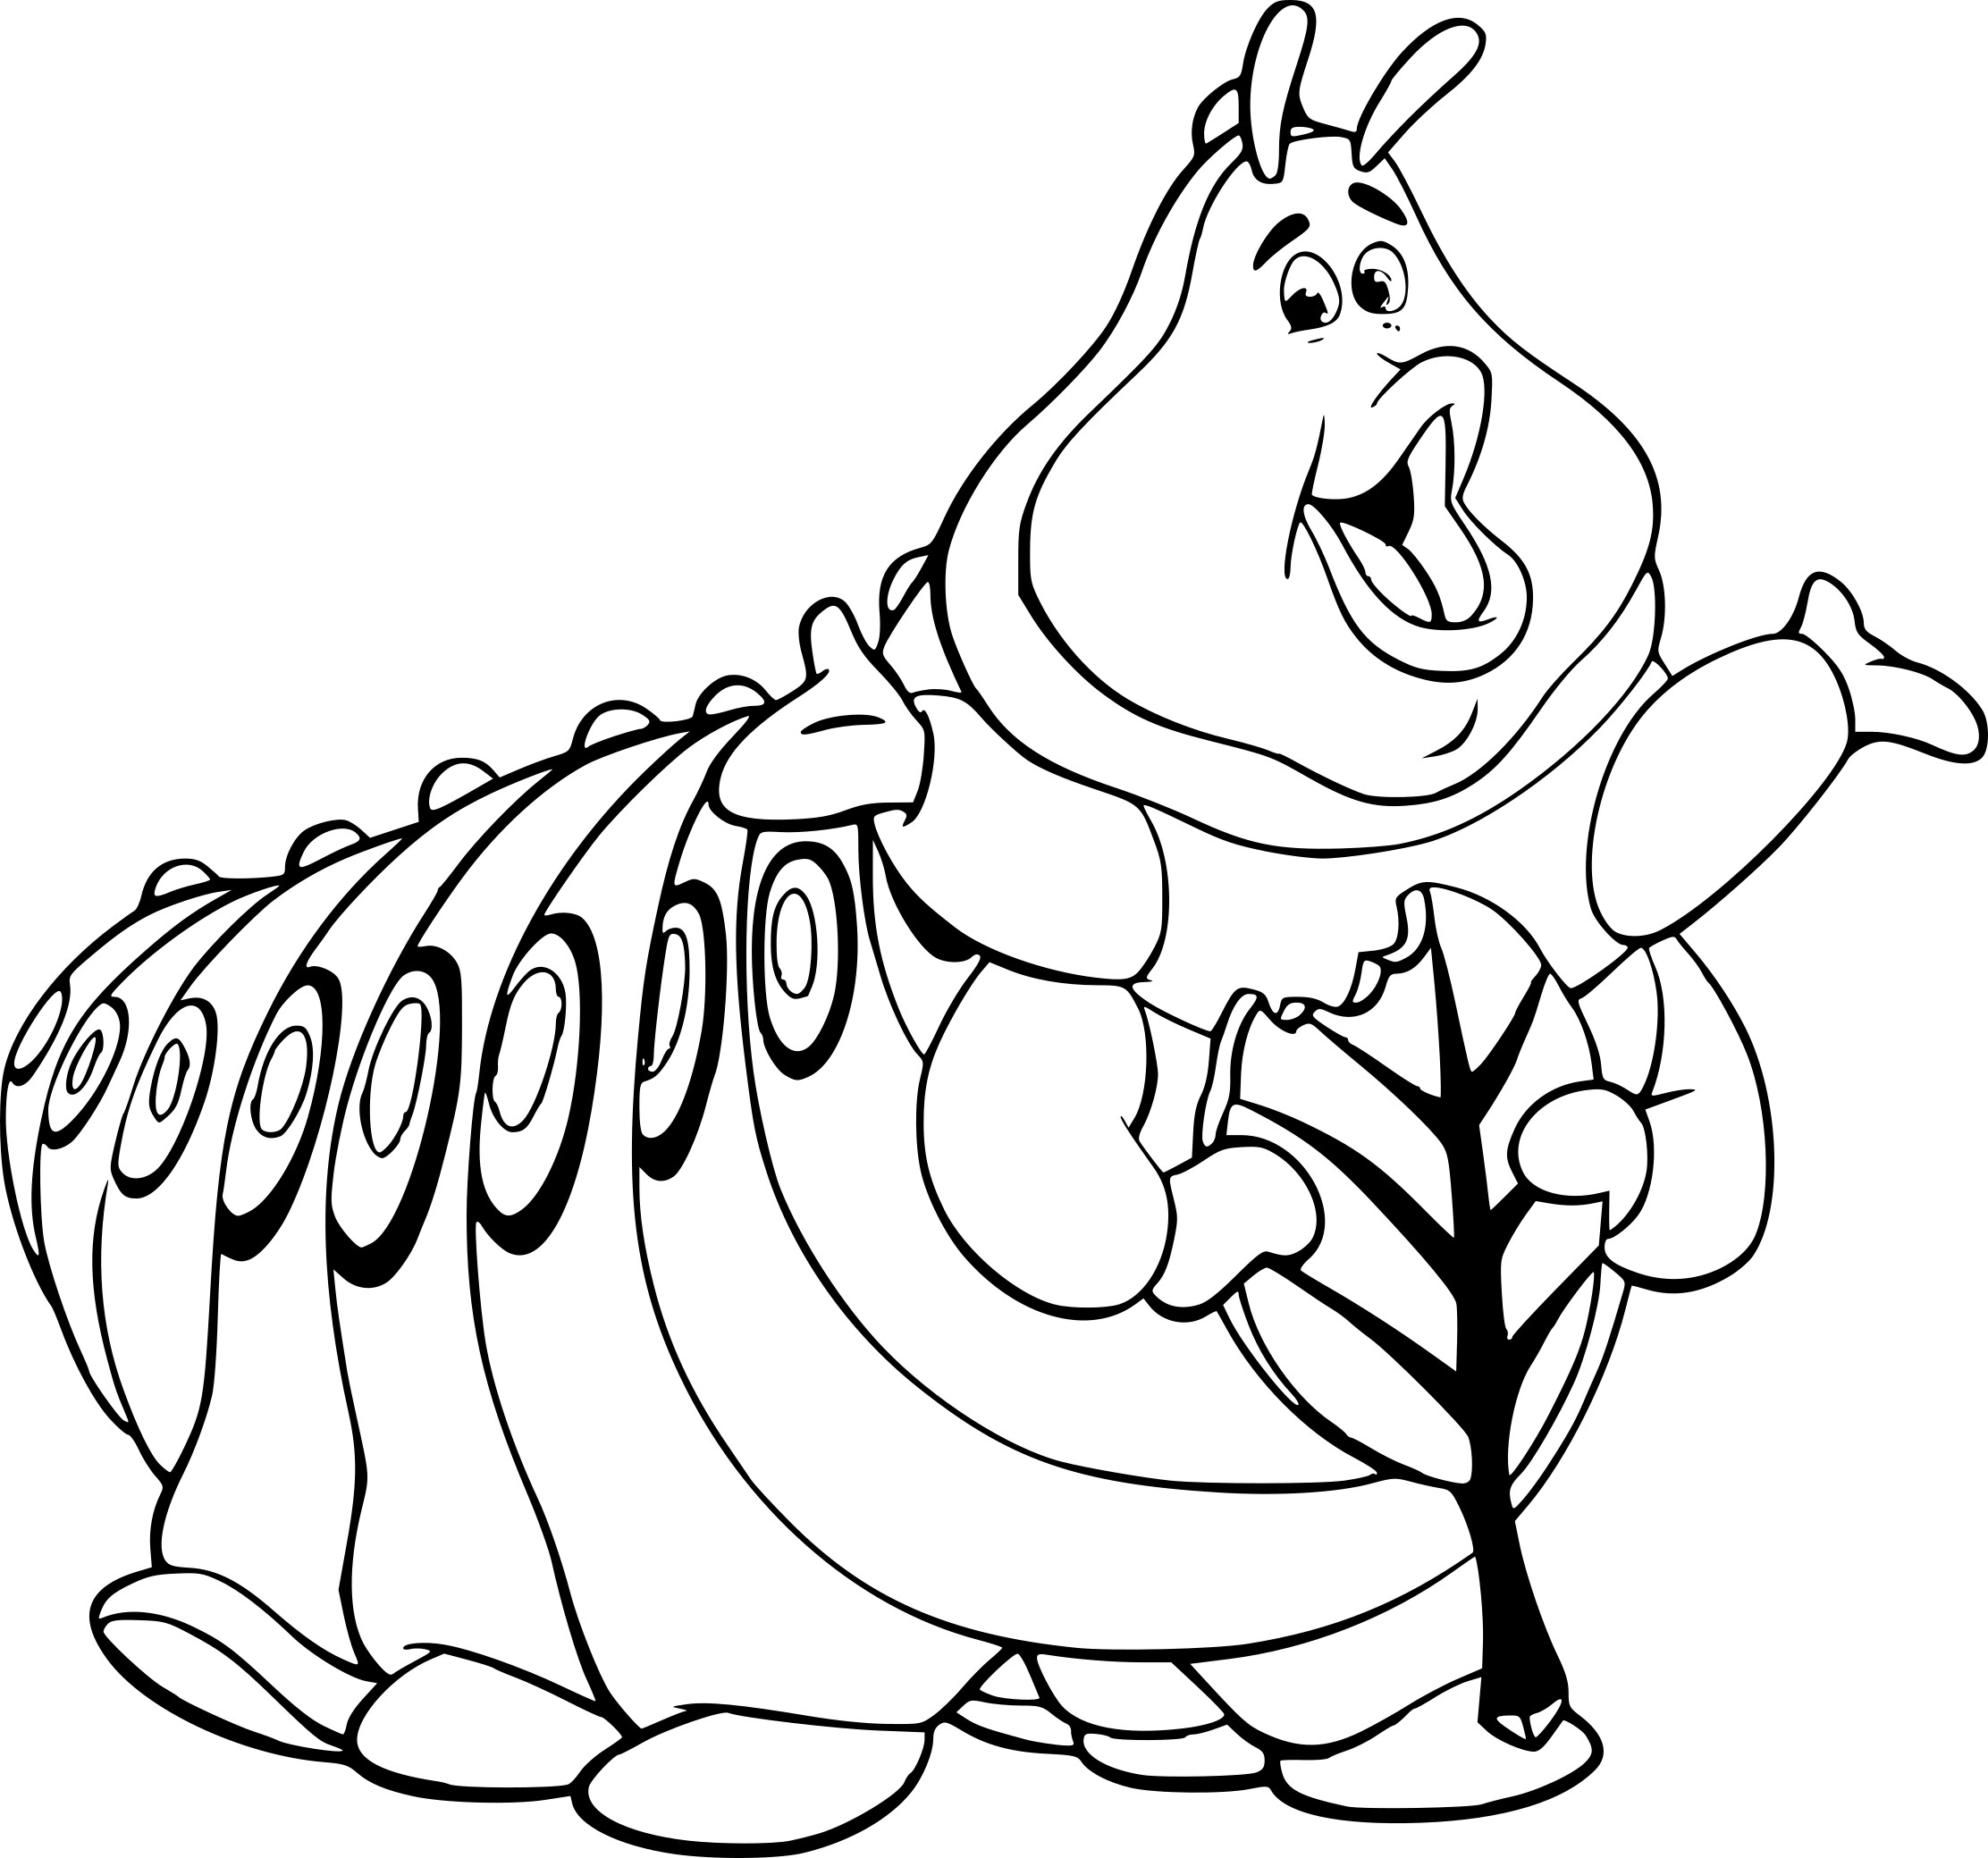 Caterpillar Alice coloring page